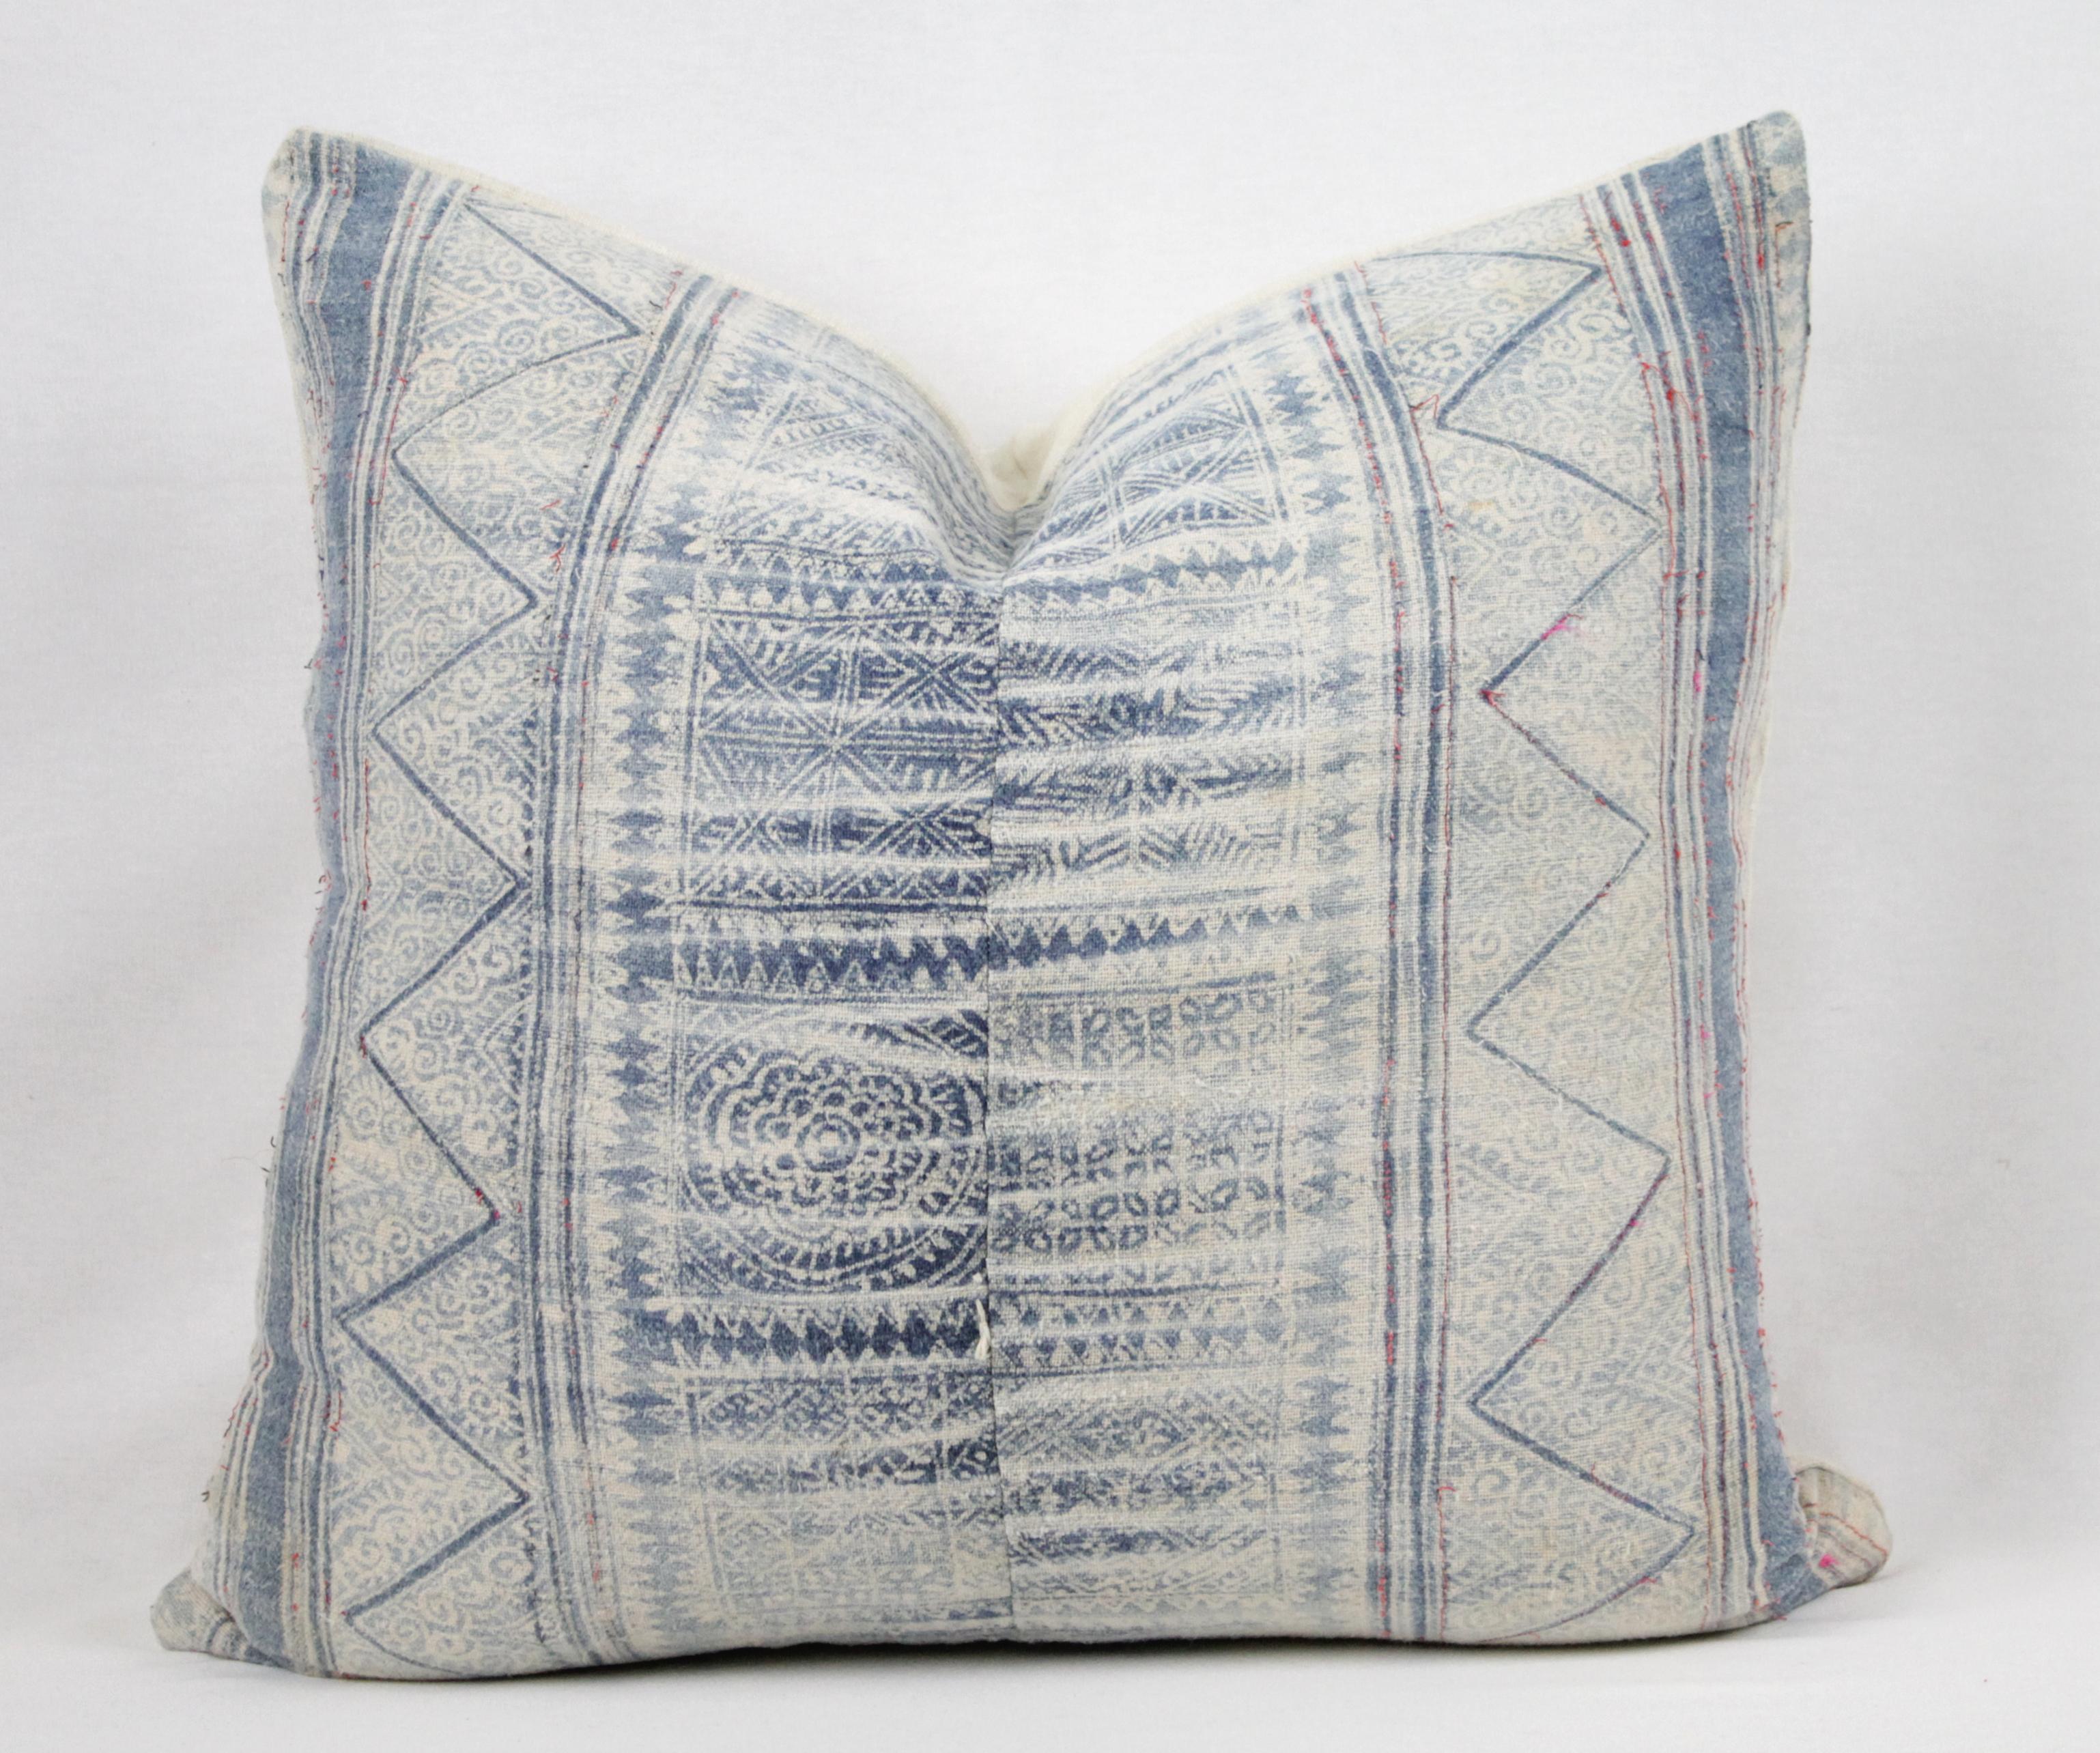 Vintage blue batik style pillow with zipper closure. Back is in antique French linen. Main colors are off-white with a medium blue, light blue color, with red thread running through the design. Does not include insert. Measures: 20